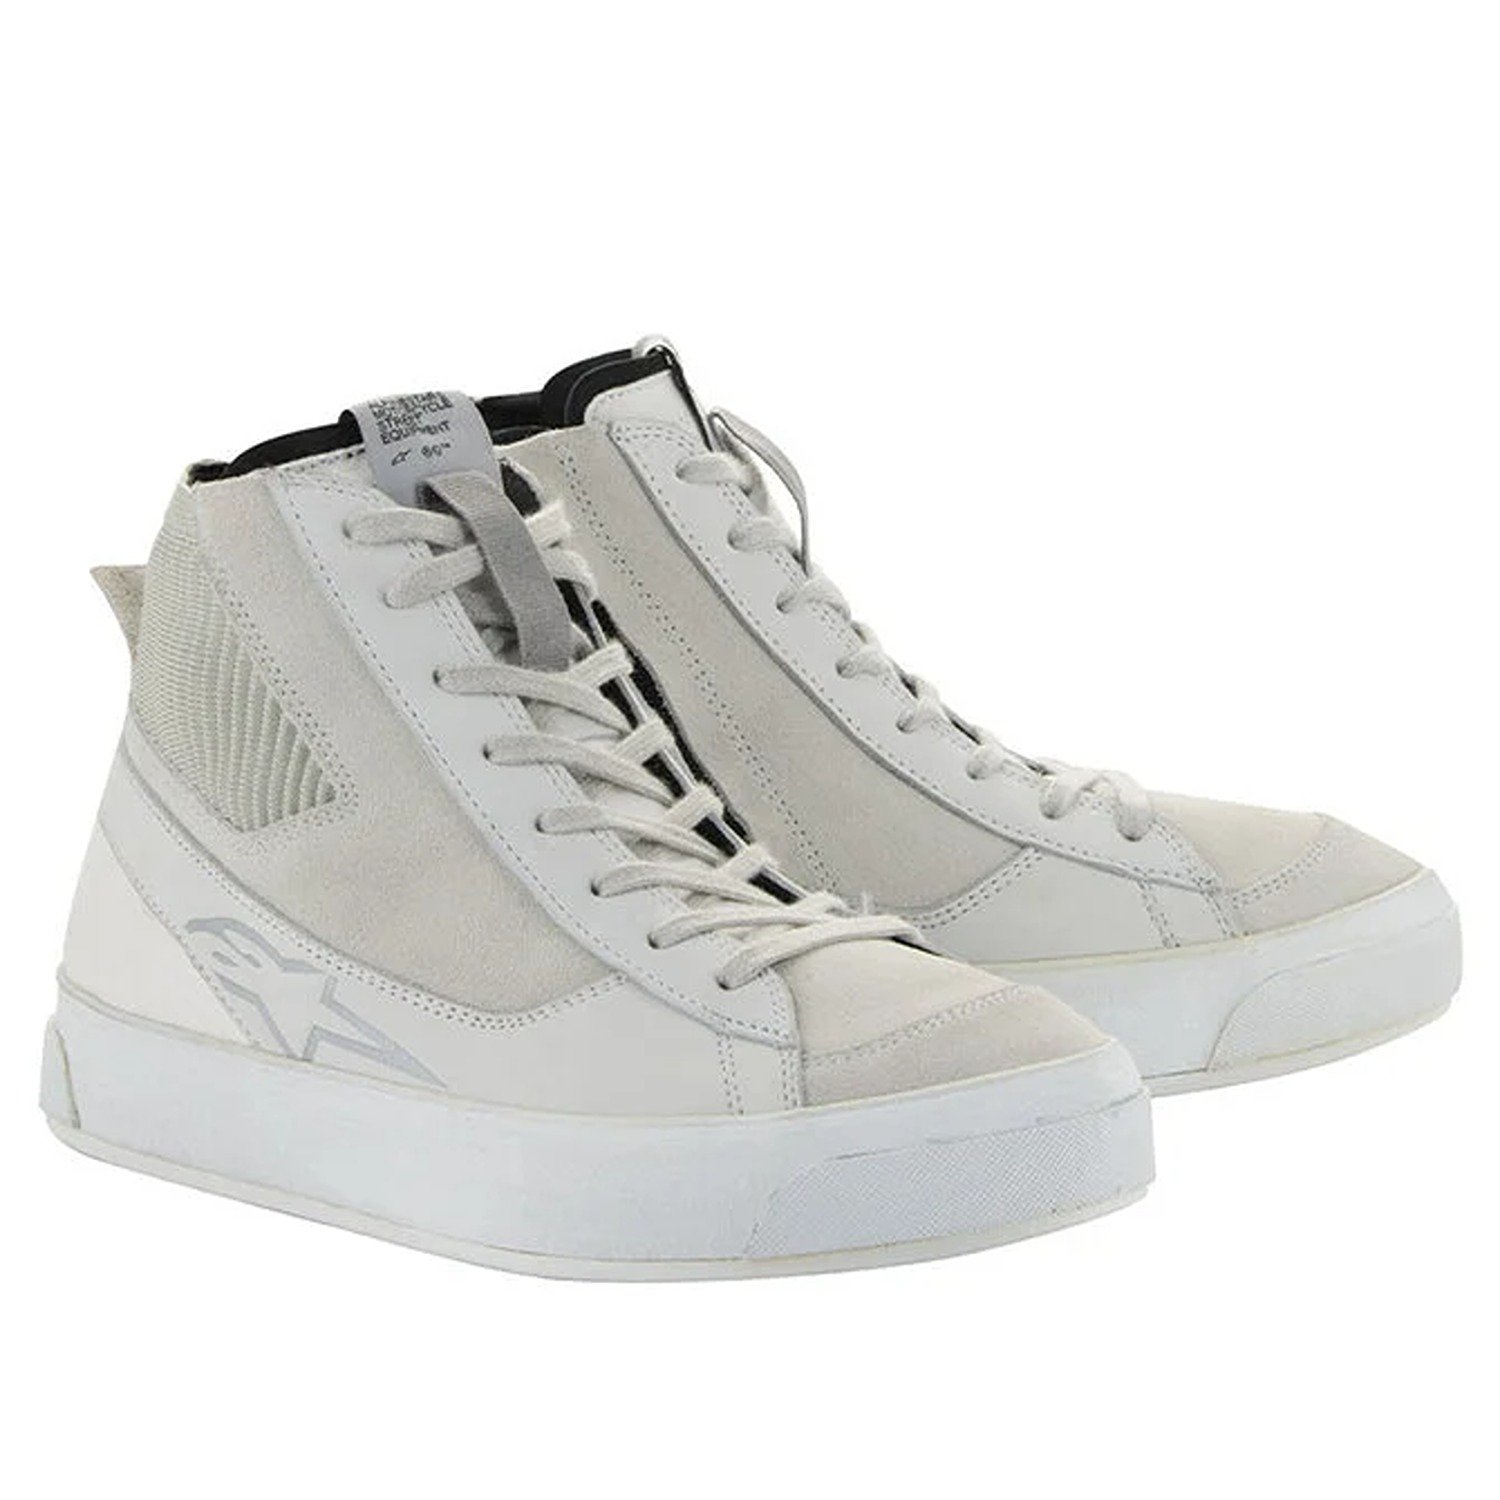 Image of Alpinestars Stella Stated Podium Shoes White Cool Gray Taille US 11